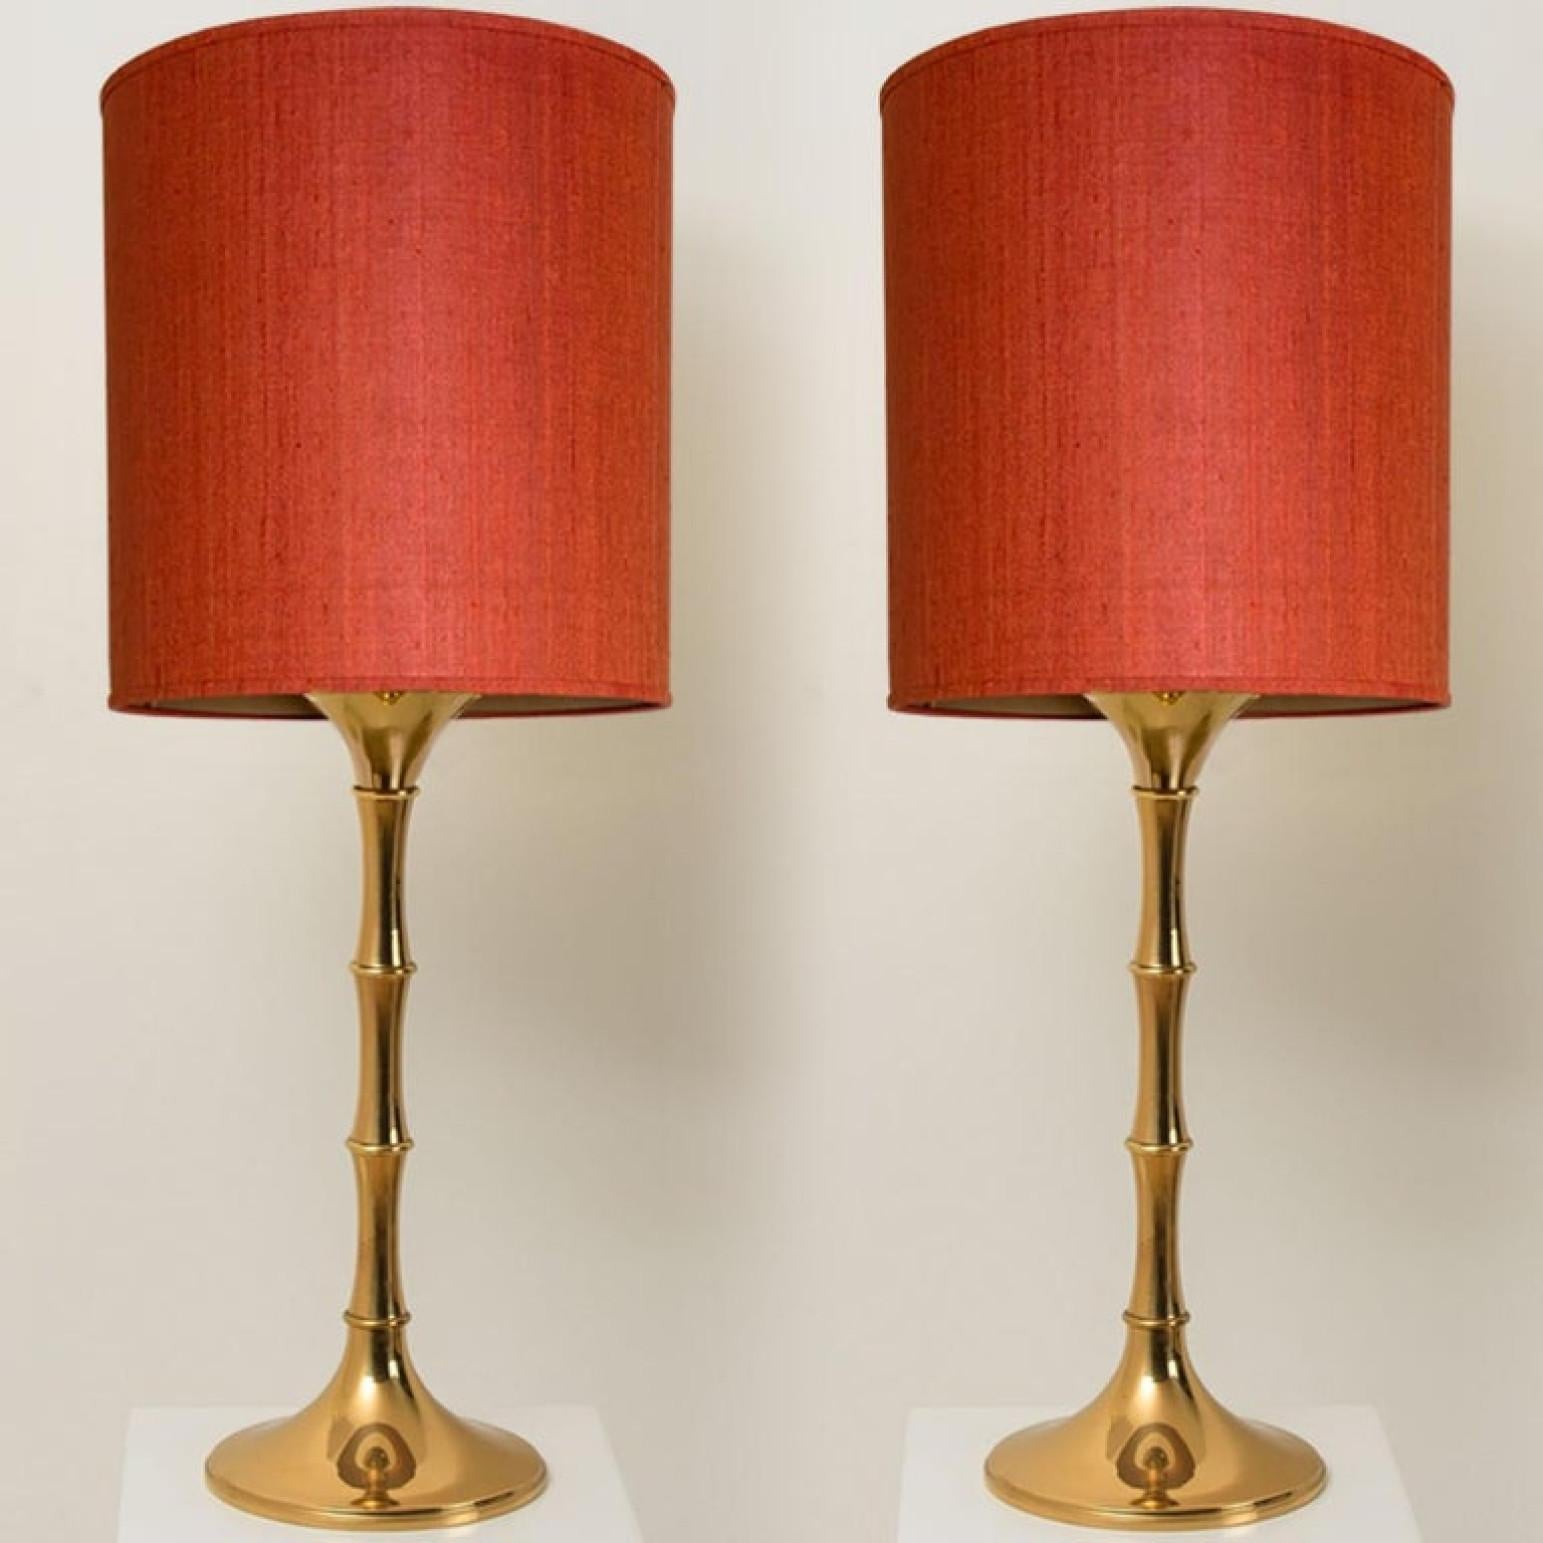 Dutch Pair of Table and Floor Lamp Designed by Ingo Maurer, 1968 For Sale